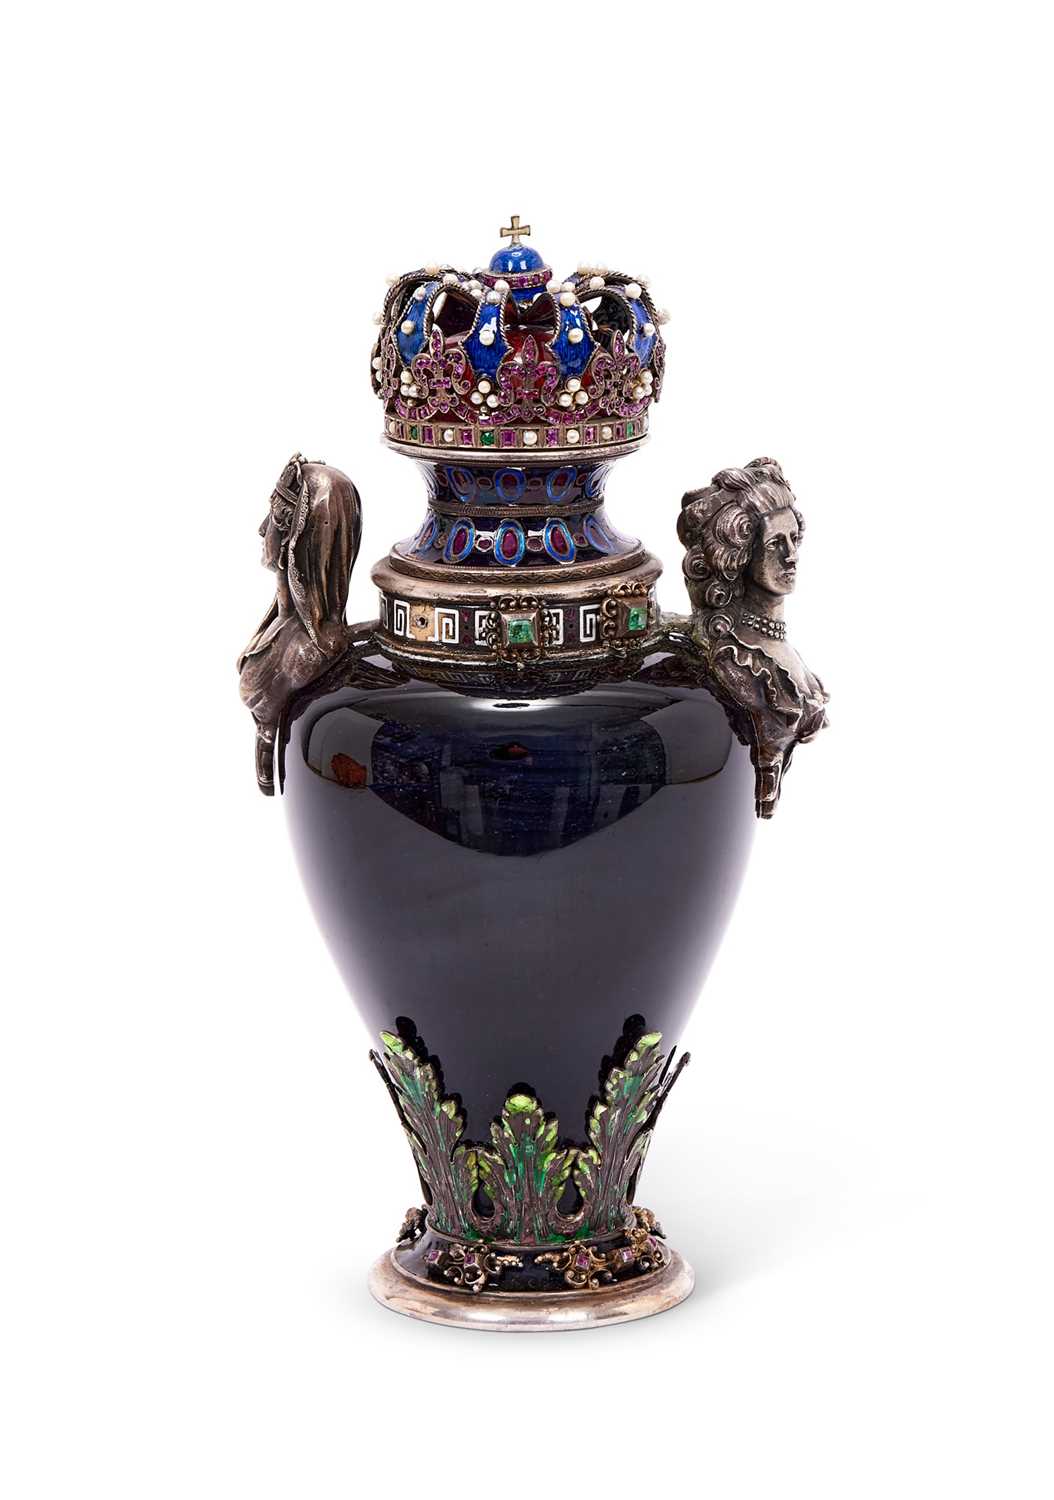 A FINE 19TH CENTURY VIENNESE ENAMEL, SILVER AND JEWELLED URN AND COVER OF ROYAL THEME - Image 2 of 6